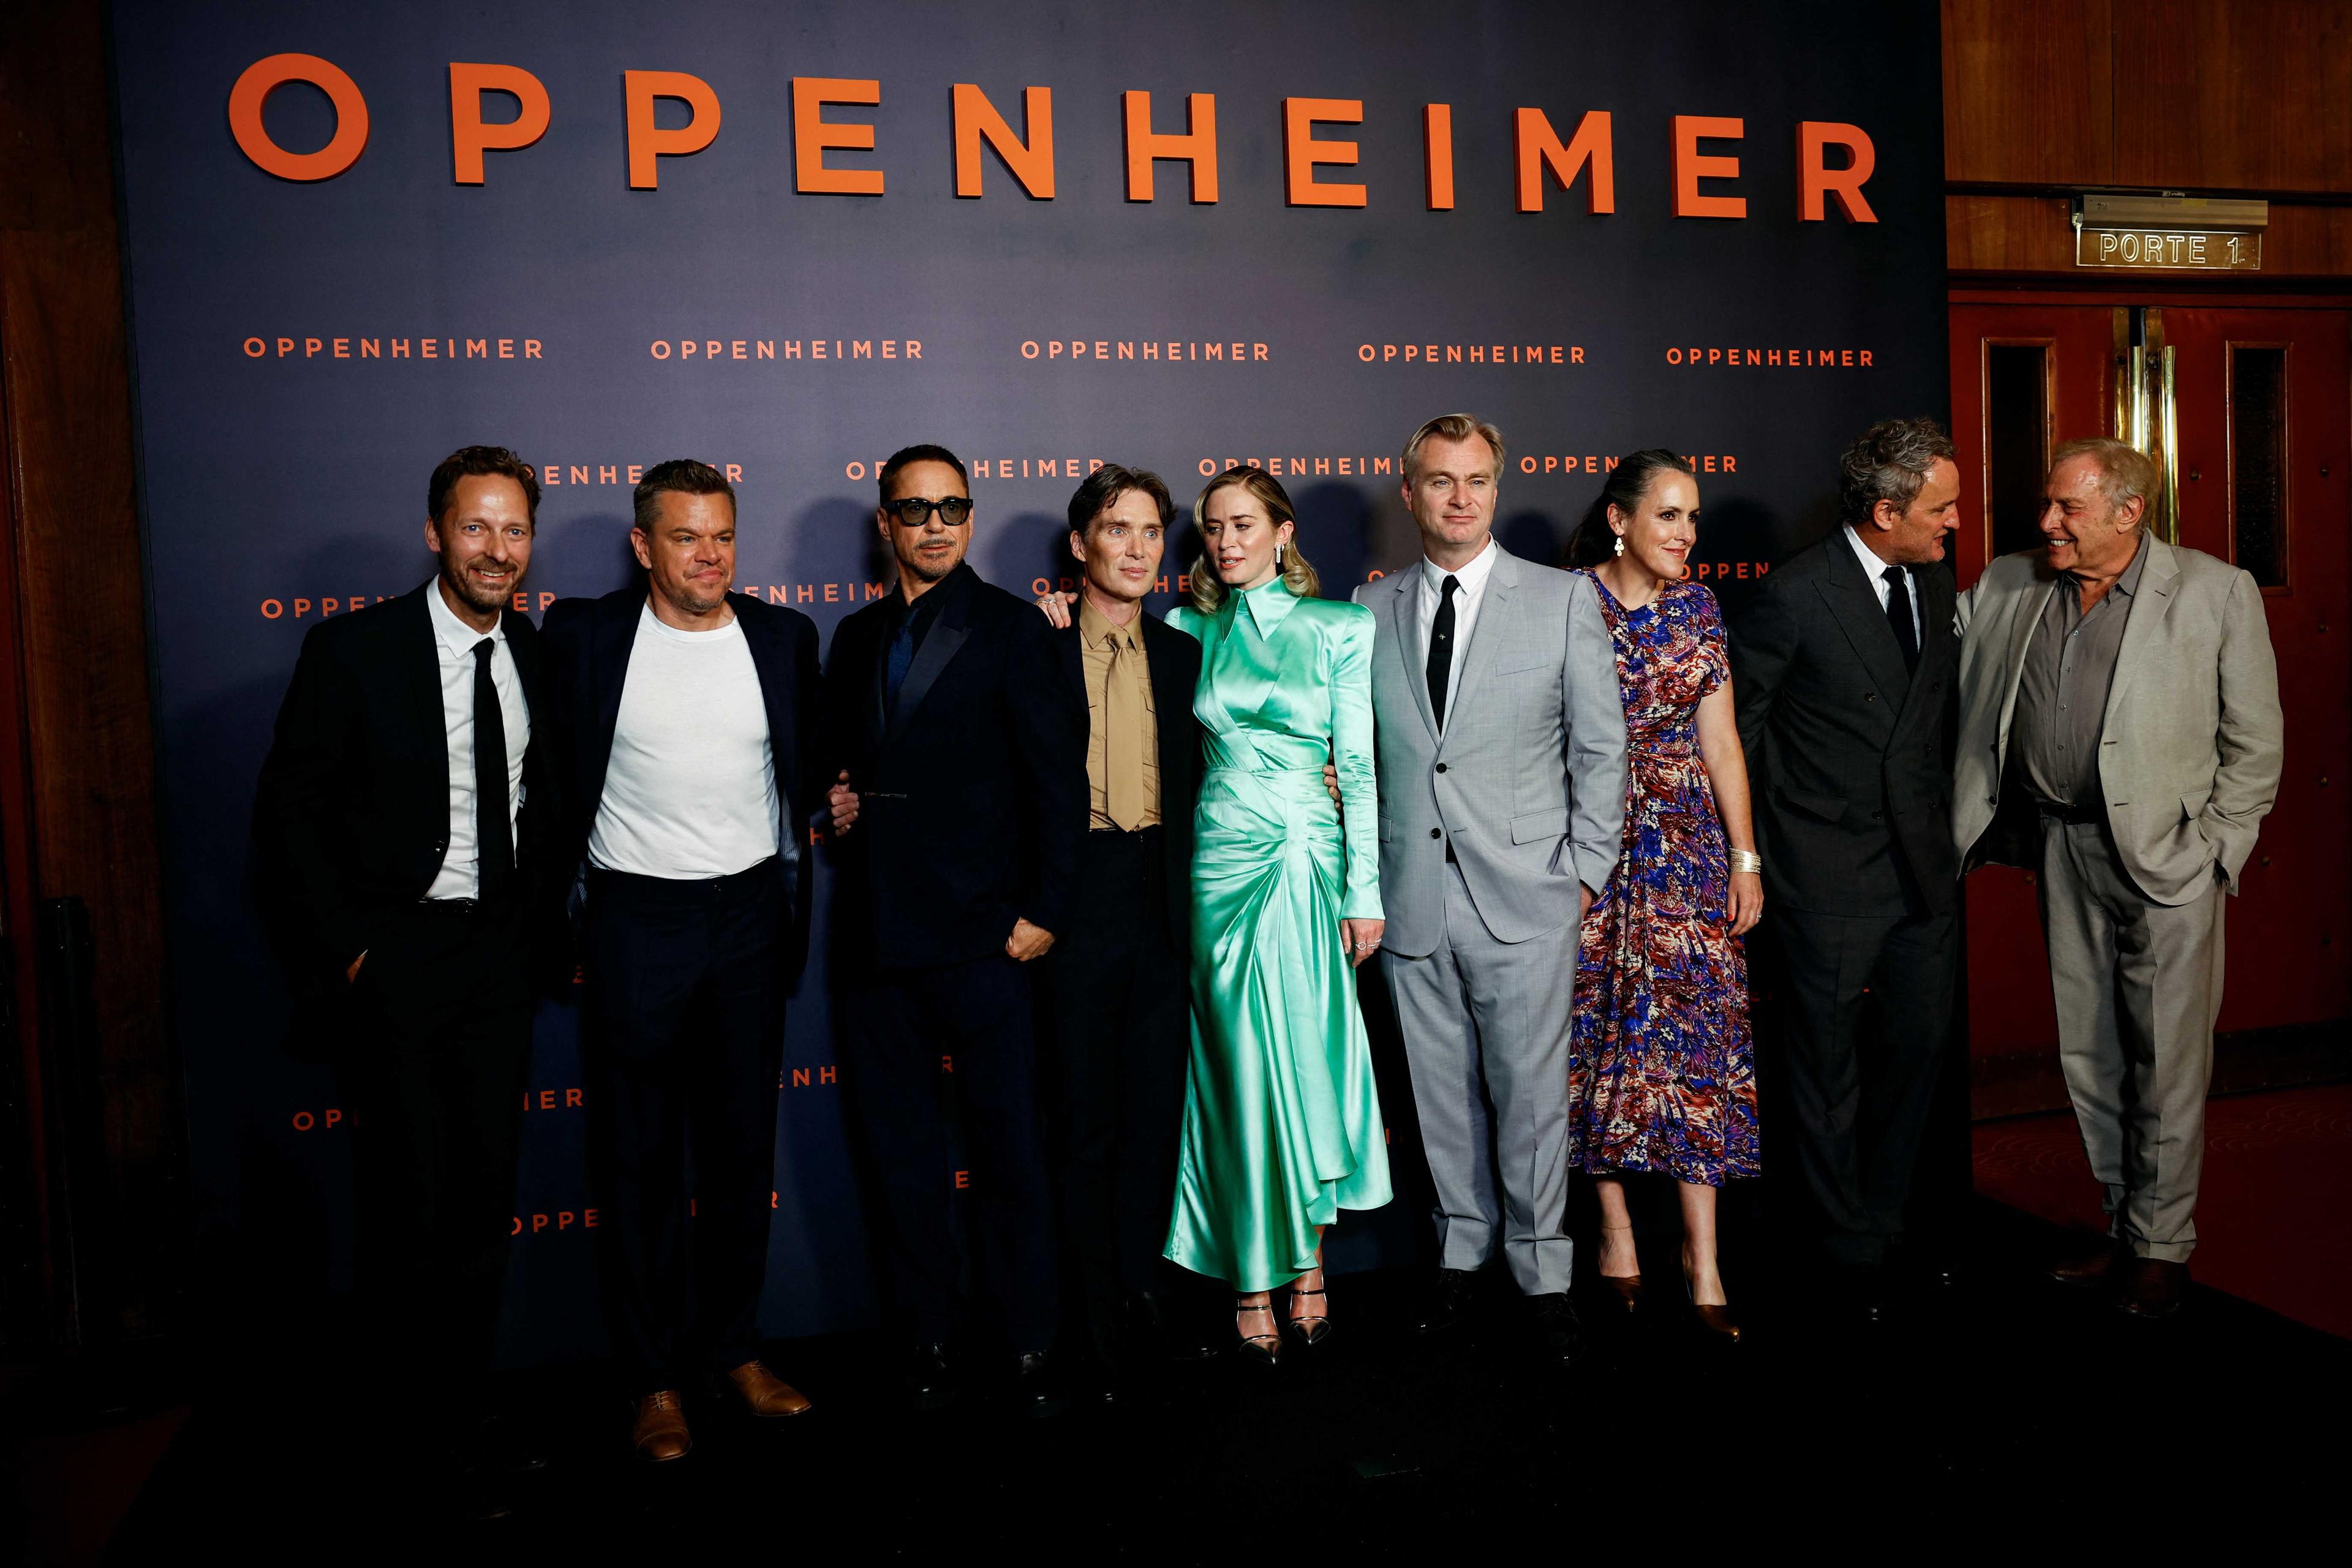 Cast members, Director Christopher Nolan and his wife Emma Thomas, and Producer Charles Roven pose during a photocall before the premiere of the film 'Oppenheimer' at the Grand Rex in Paris, France, July 11. Photo: Reuters